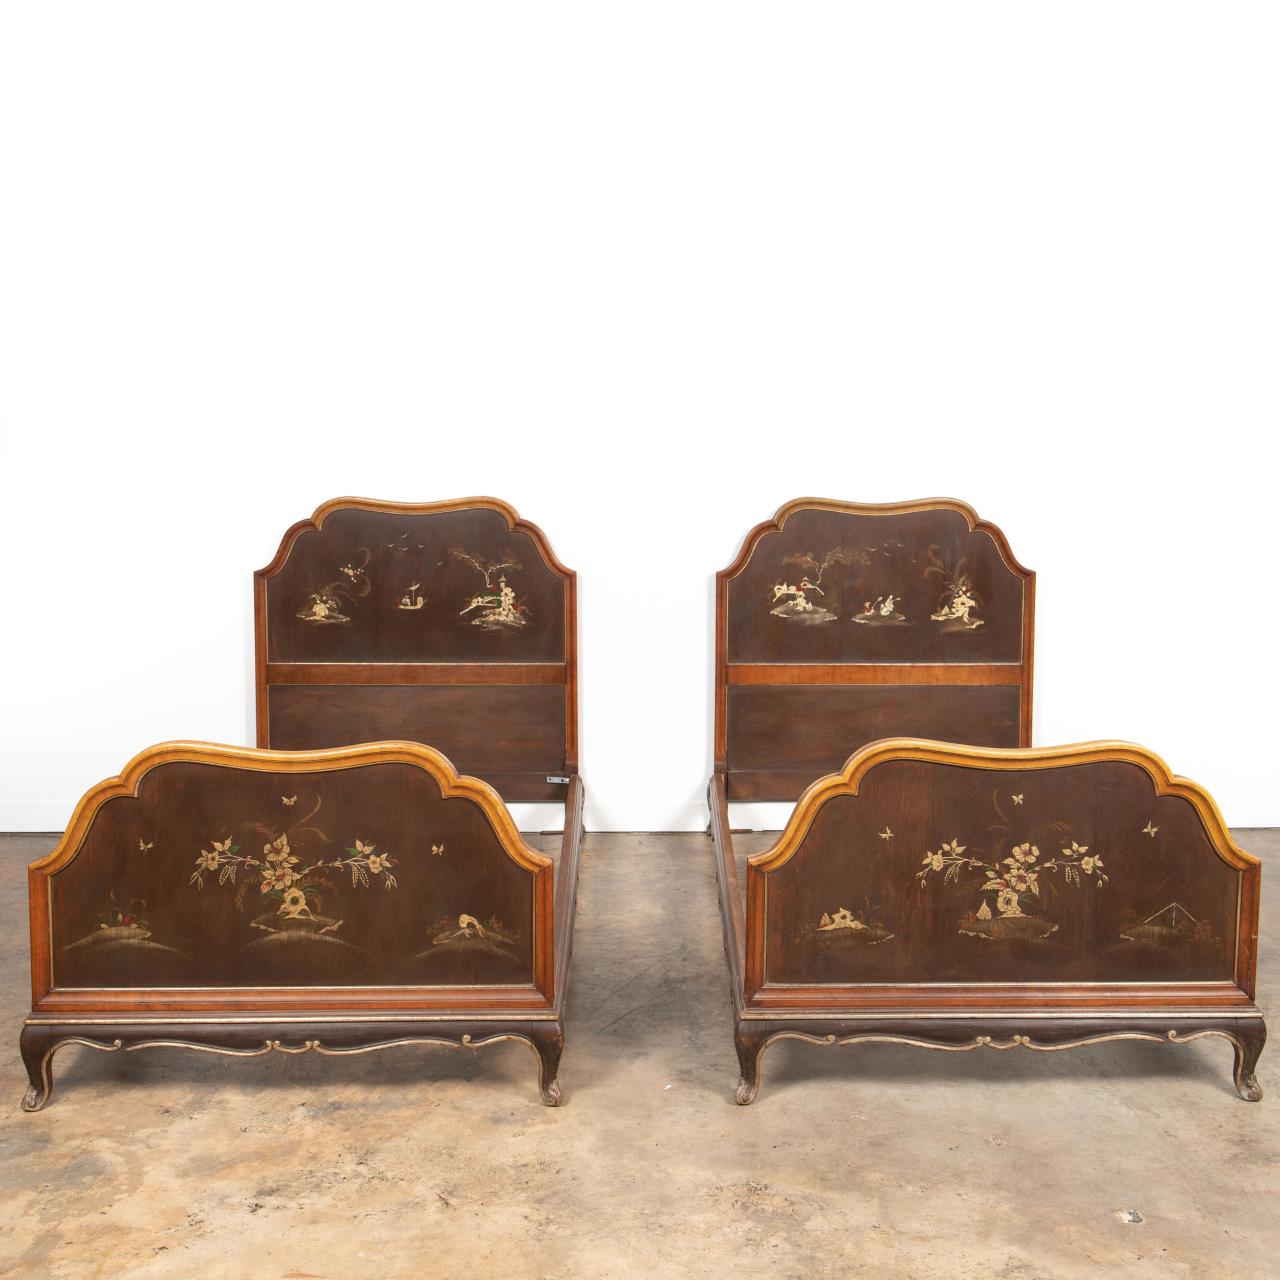 PAIR CHINOISERIE MOTIF TWIN BED 35c992